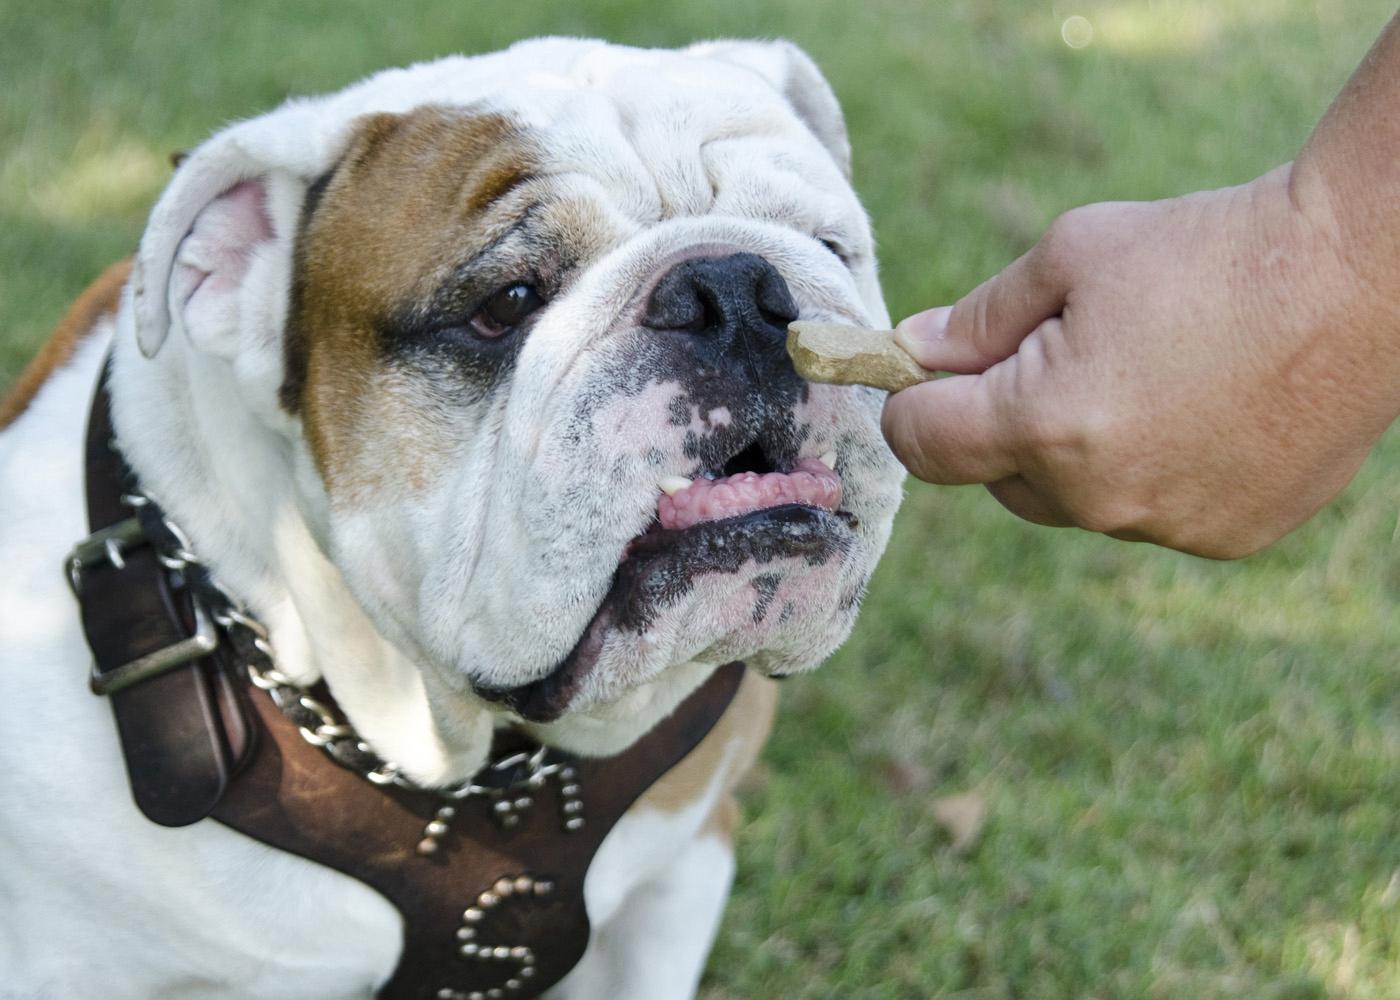 In his training as the Mississippi State University mascot, Bully XX earns hypoallergenic treats that are part of his overall nutrition and conditioning plan. (Photo by Tom Thompson)